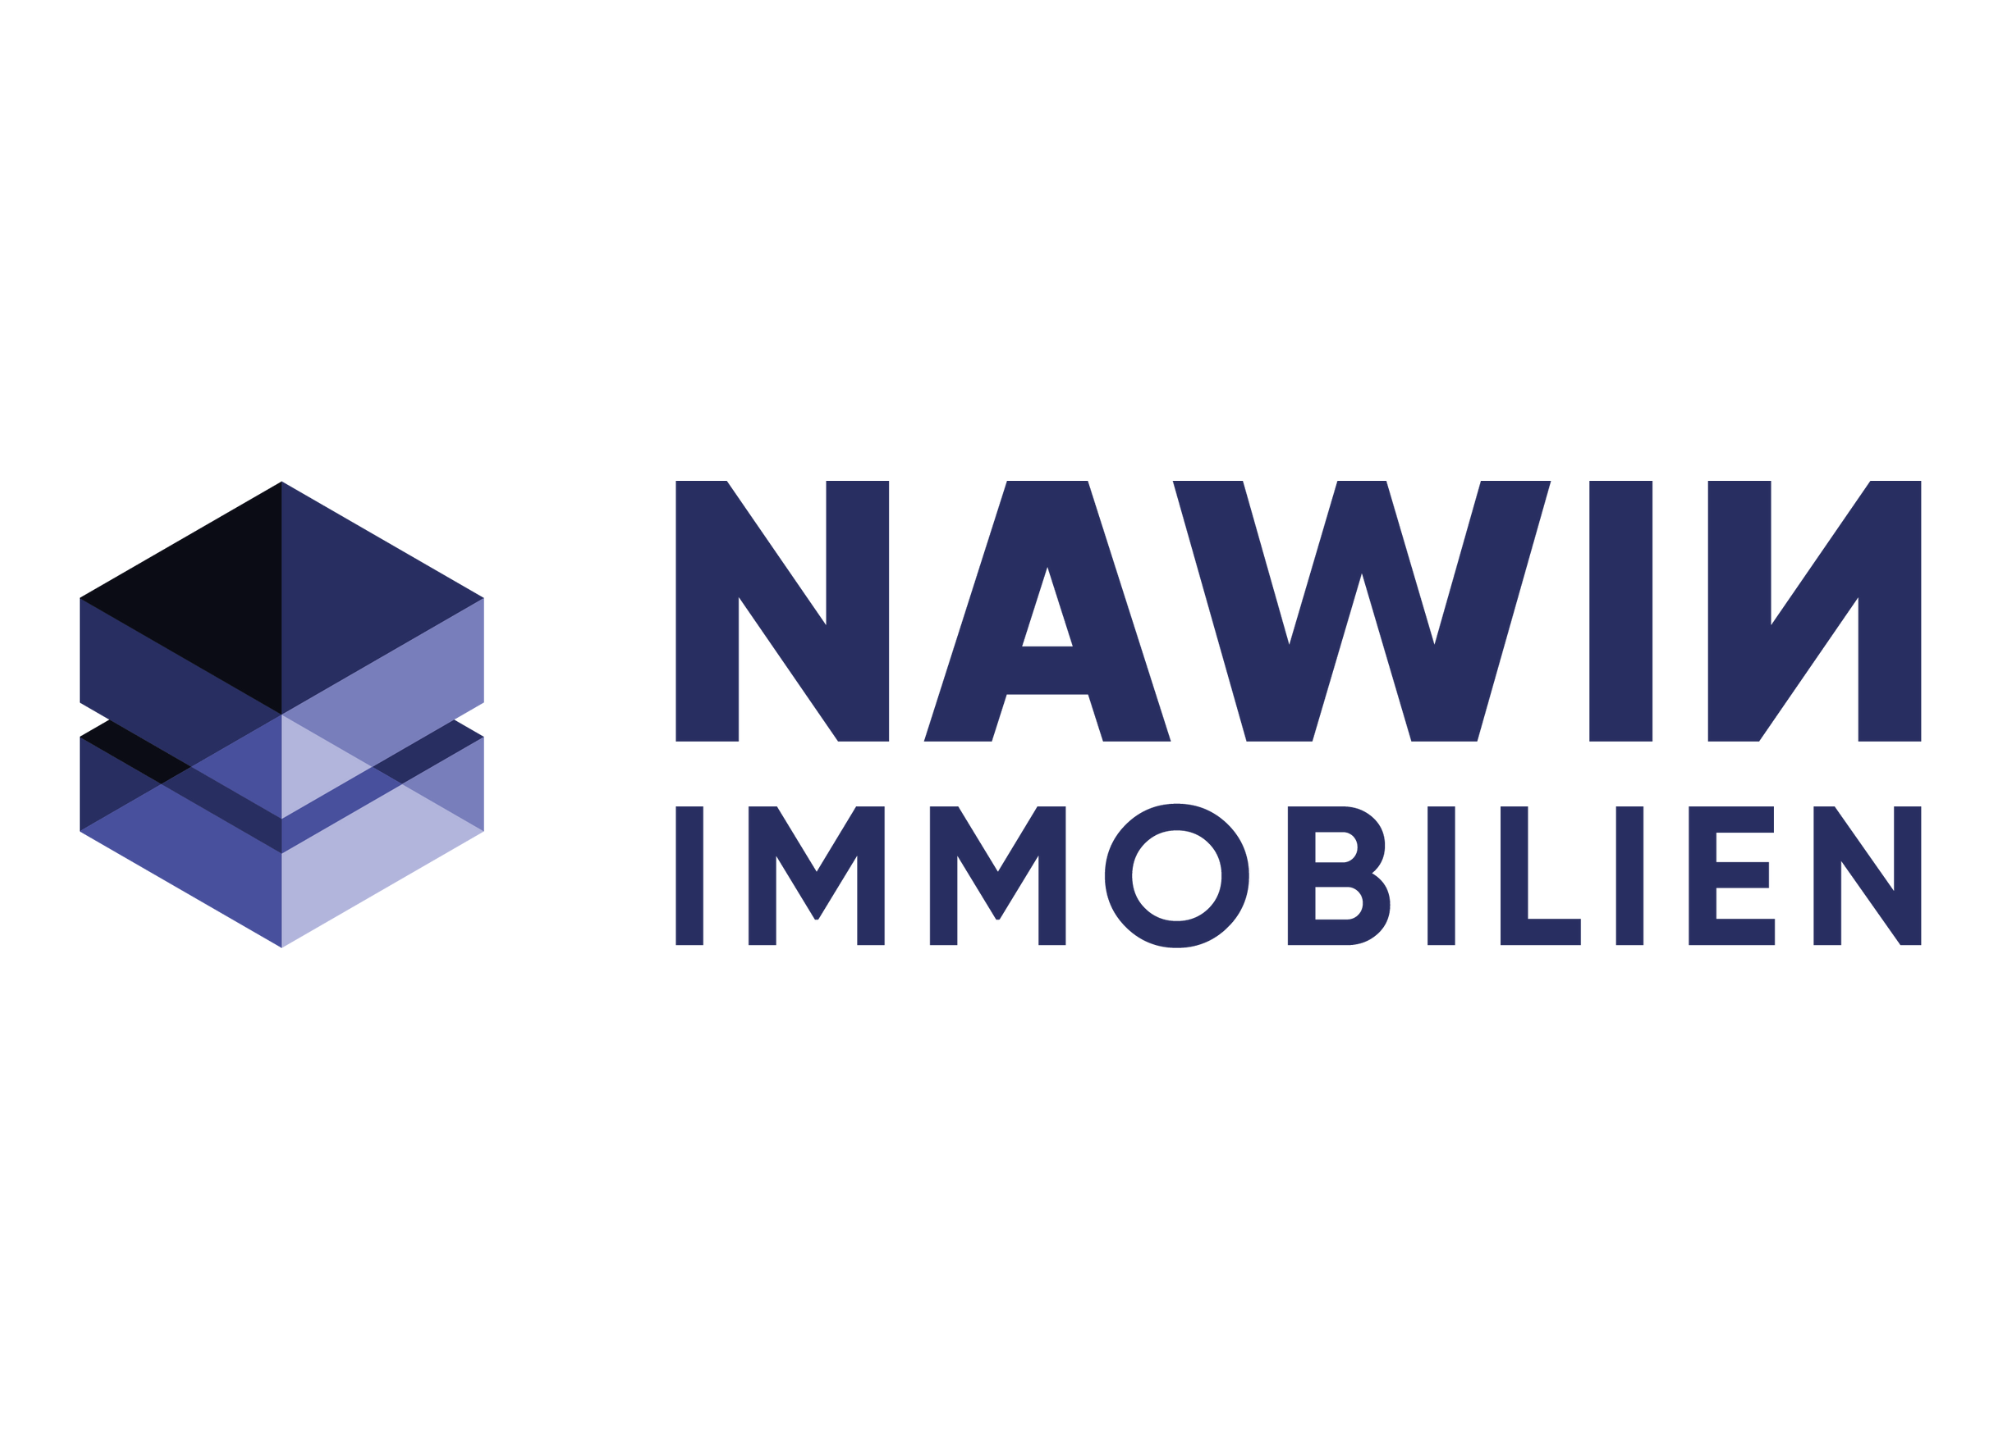 Nawin Immobilien